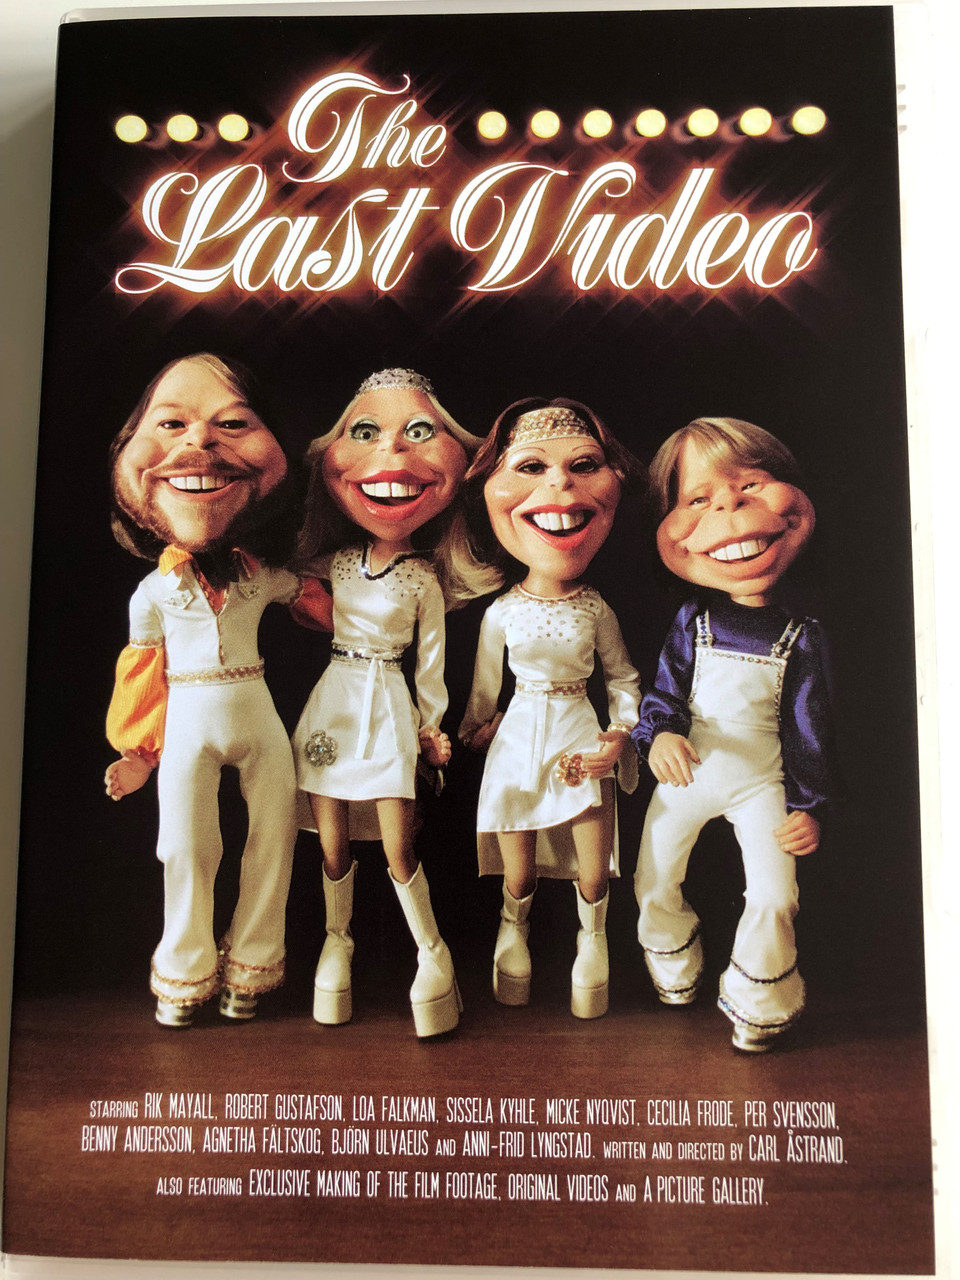 ABBA - The Last Video DVD 2004 / A smallscale comeback in The Last Video! /  Directed by Carl Astrand / Starring: Rik Mayall, Robert Gustafson, Loa  Falkman, Sissela Kyhle, Micke Nyqvist, Cecilia Frode - bibleinmylanguage